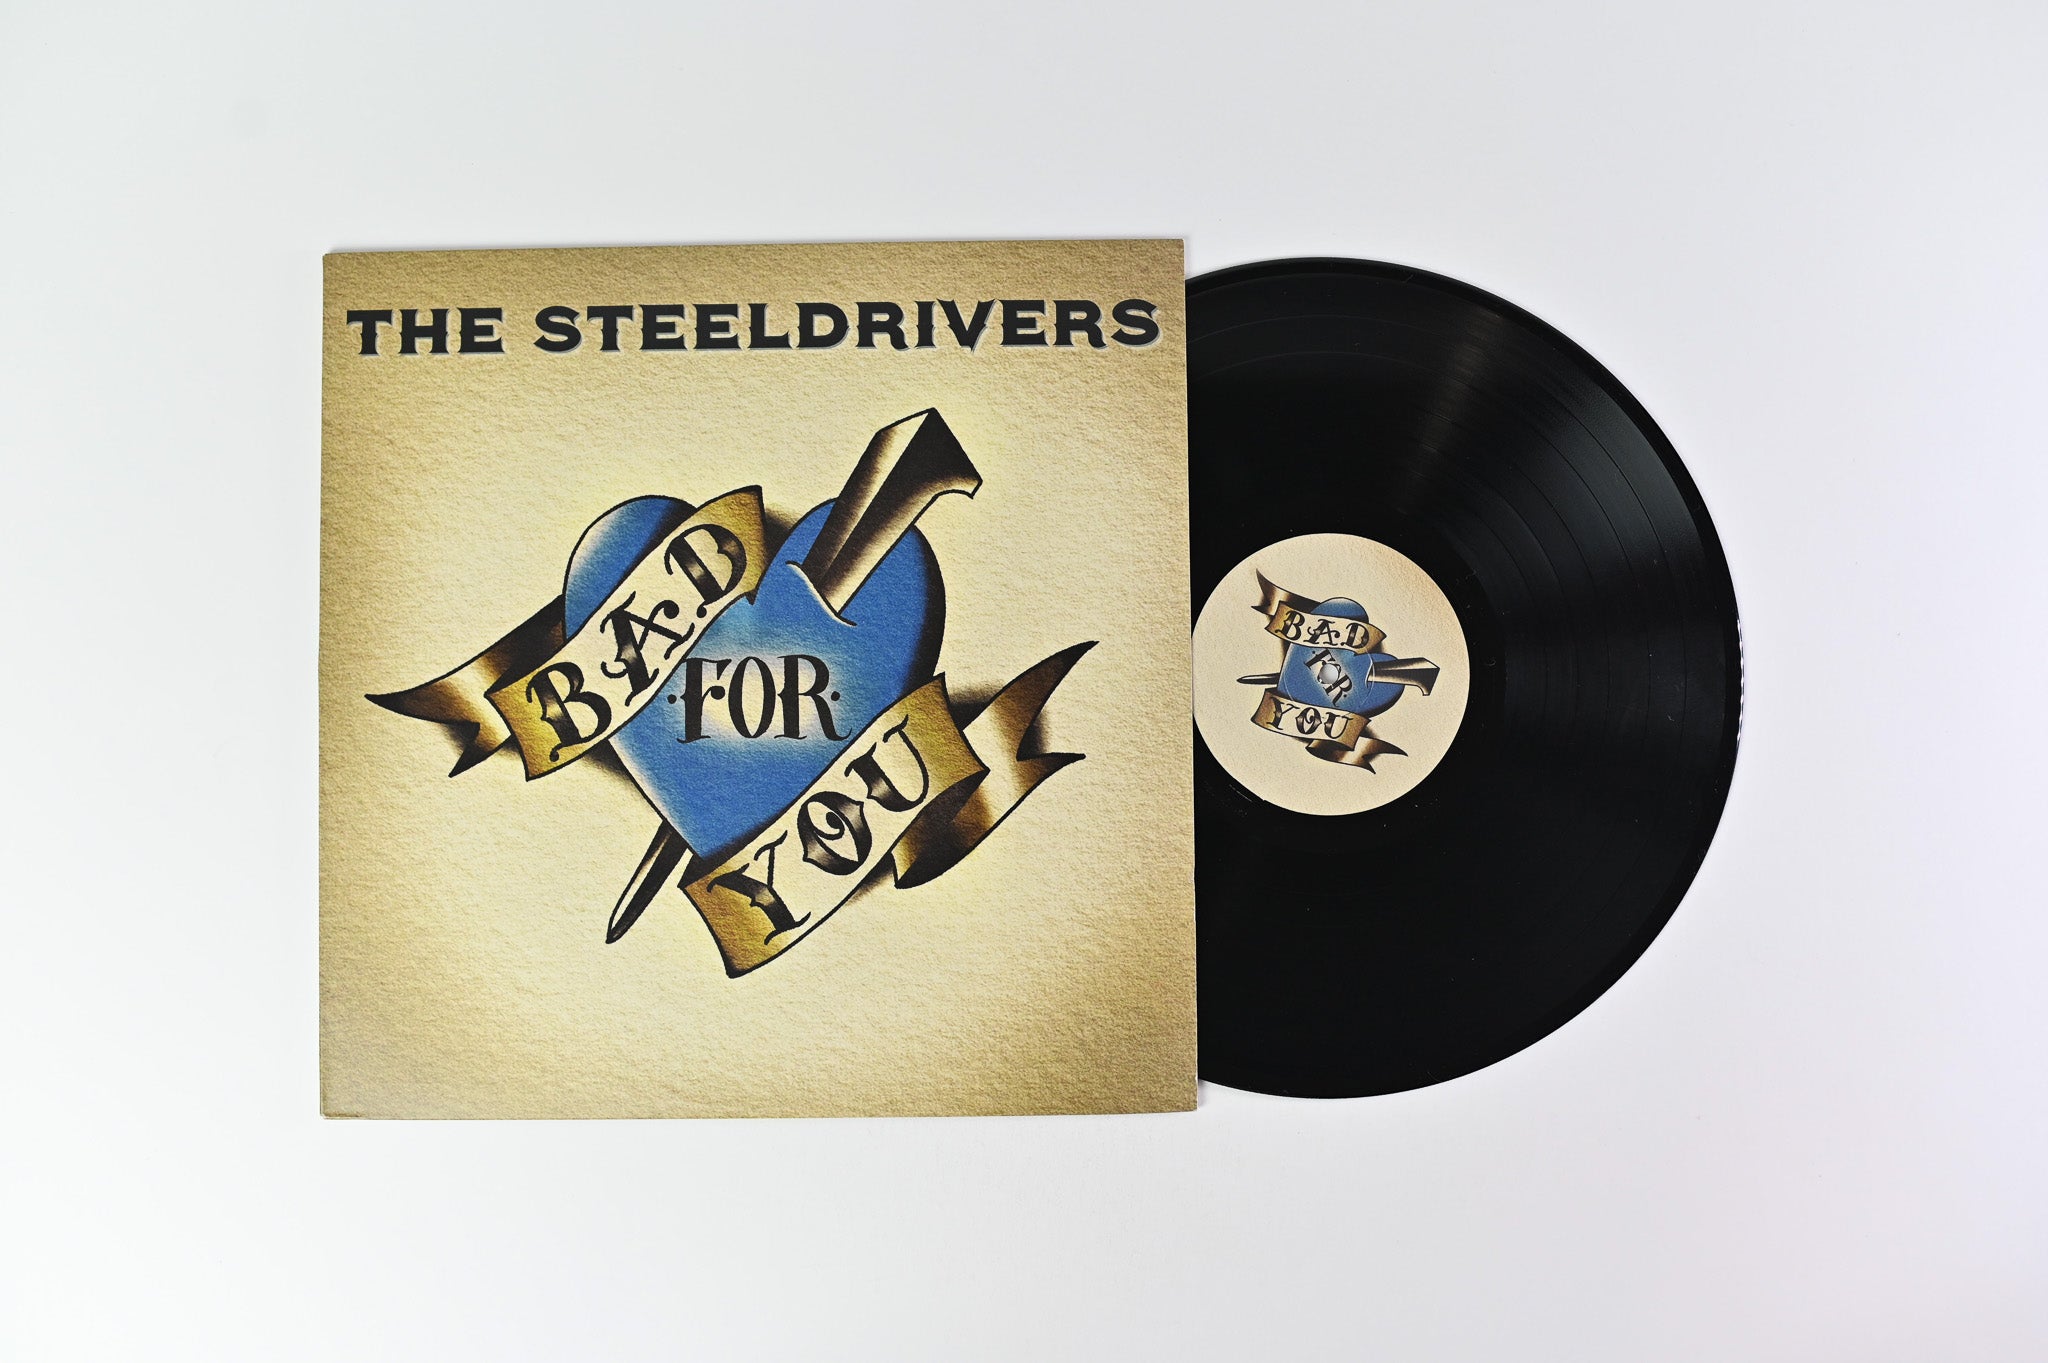 The SteelDrivers - Bad For You on Rounder